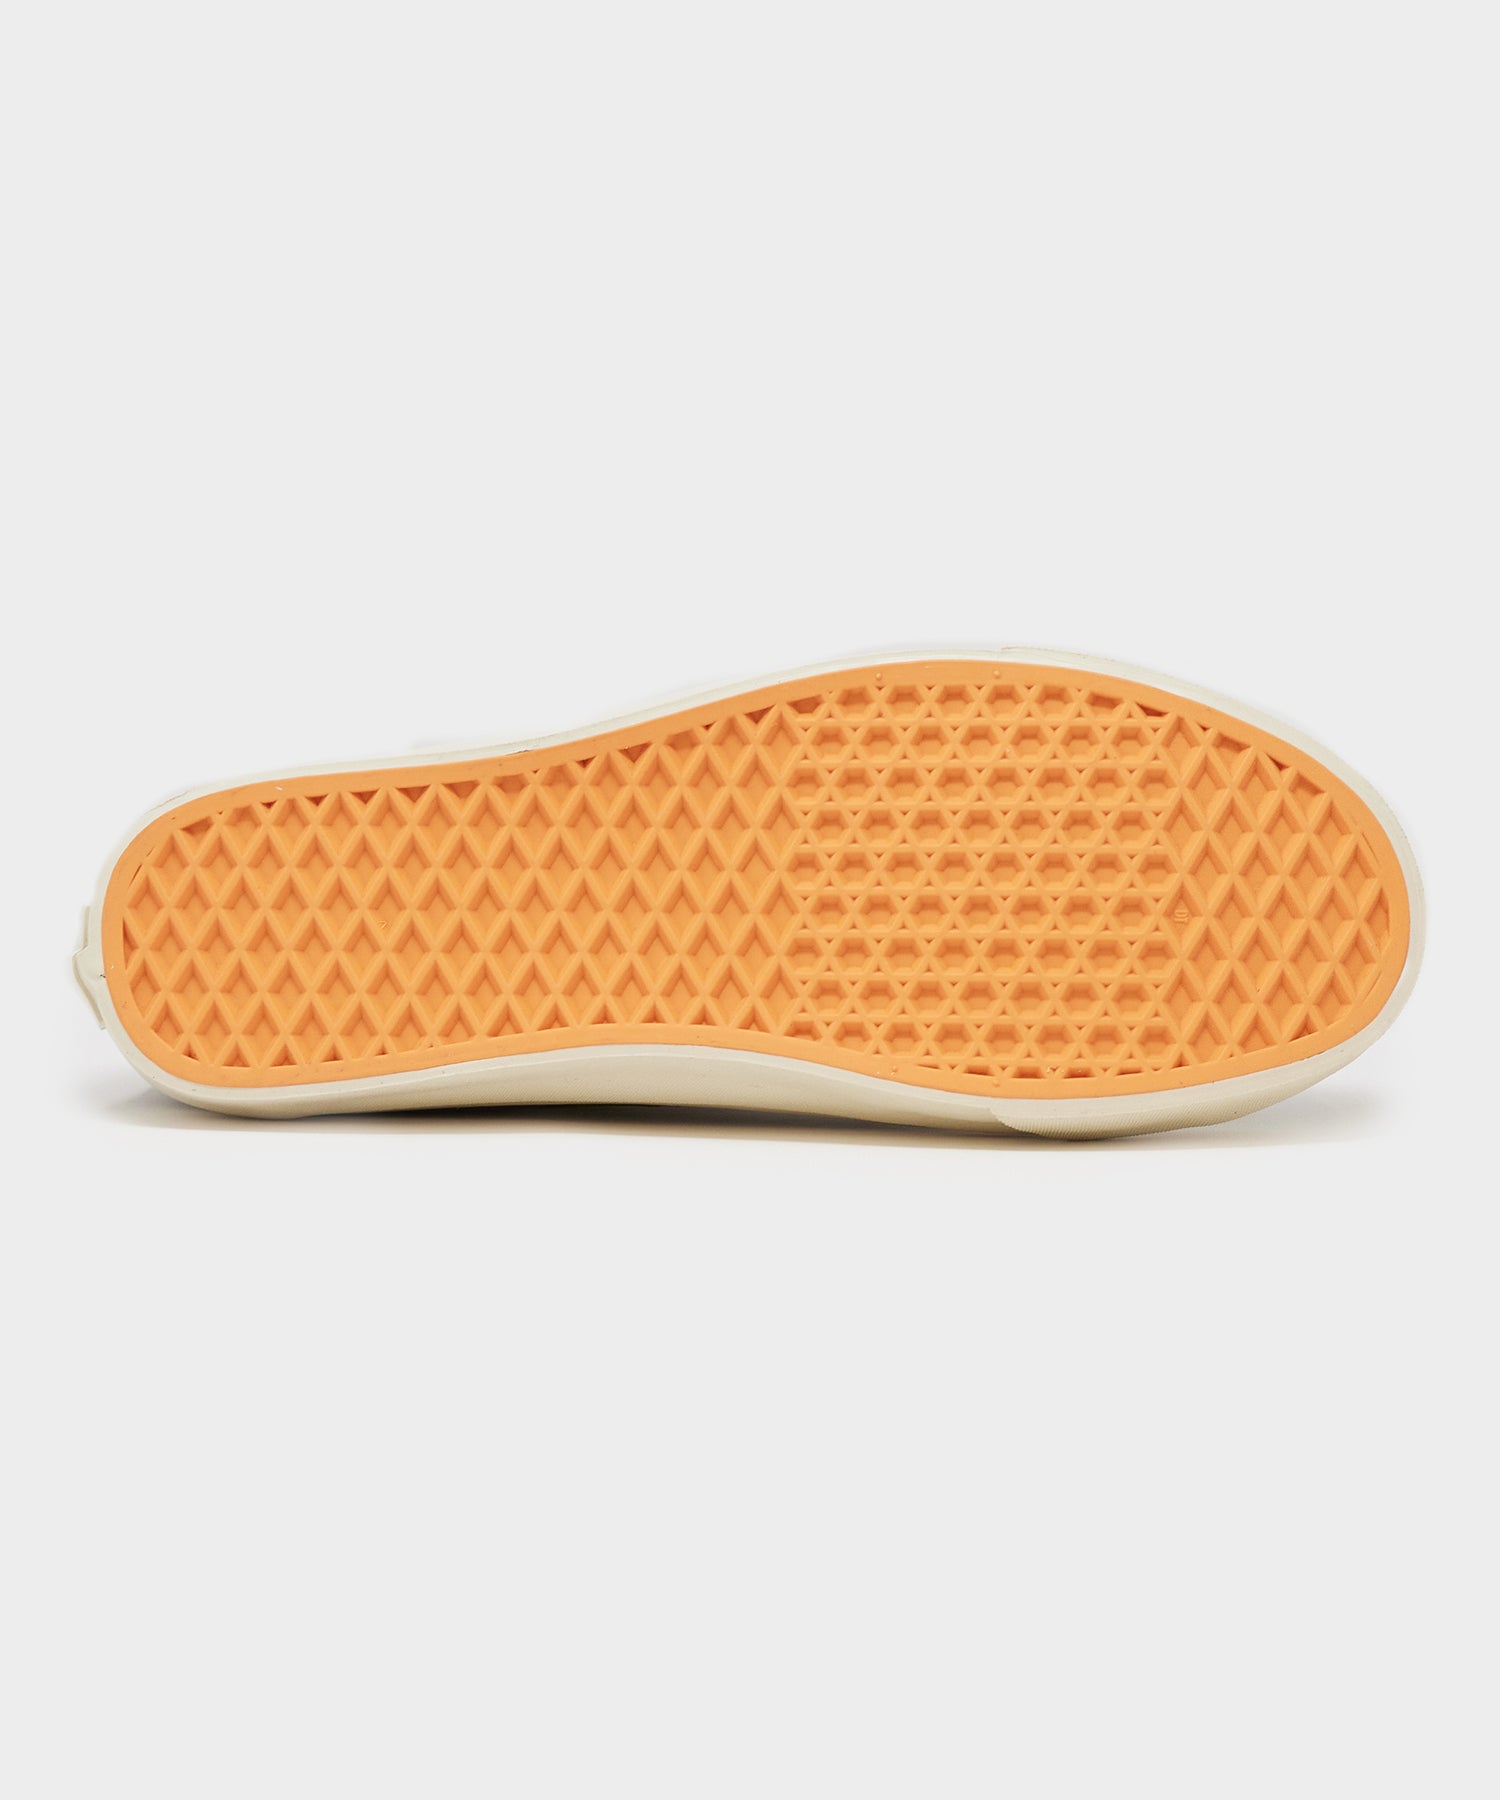 Vans Custom Slip On Multiple Size 7.5 - $30 (53% Off Retail) New With Tags  - From Maeve